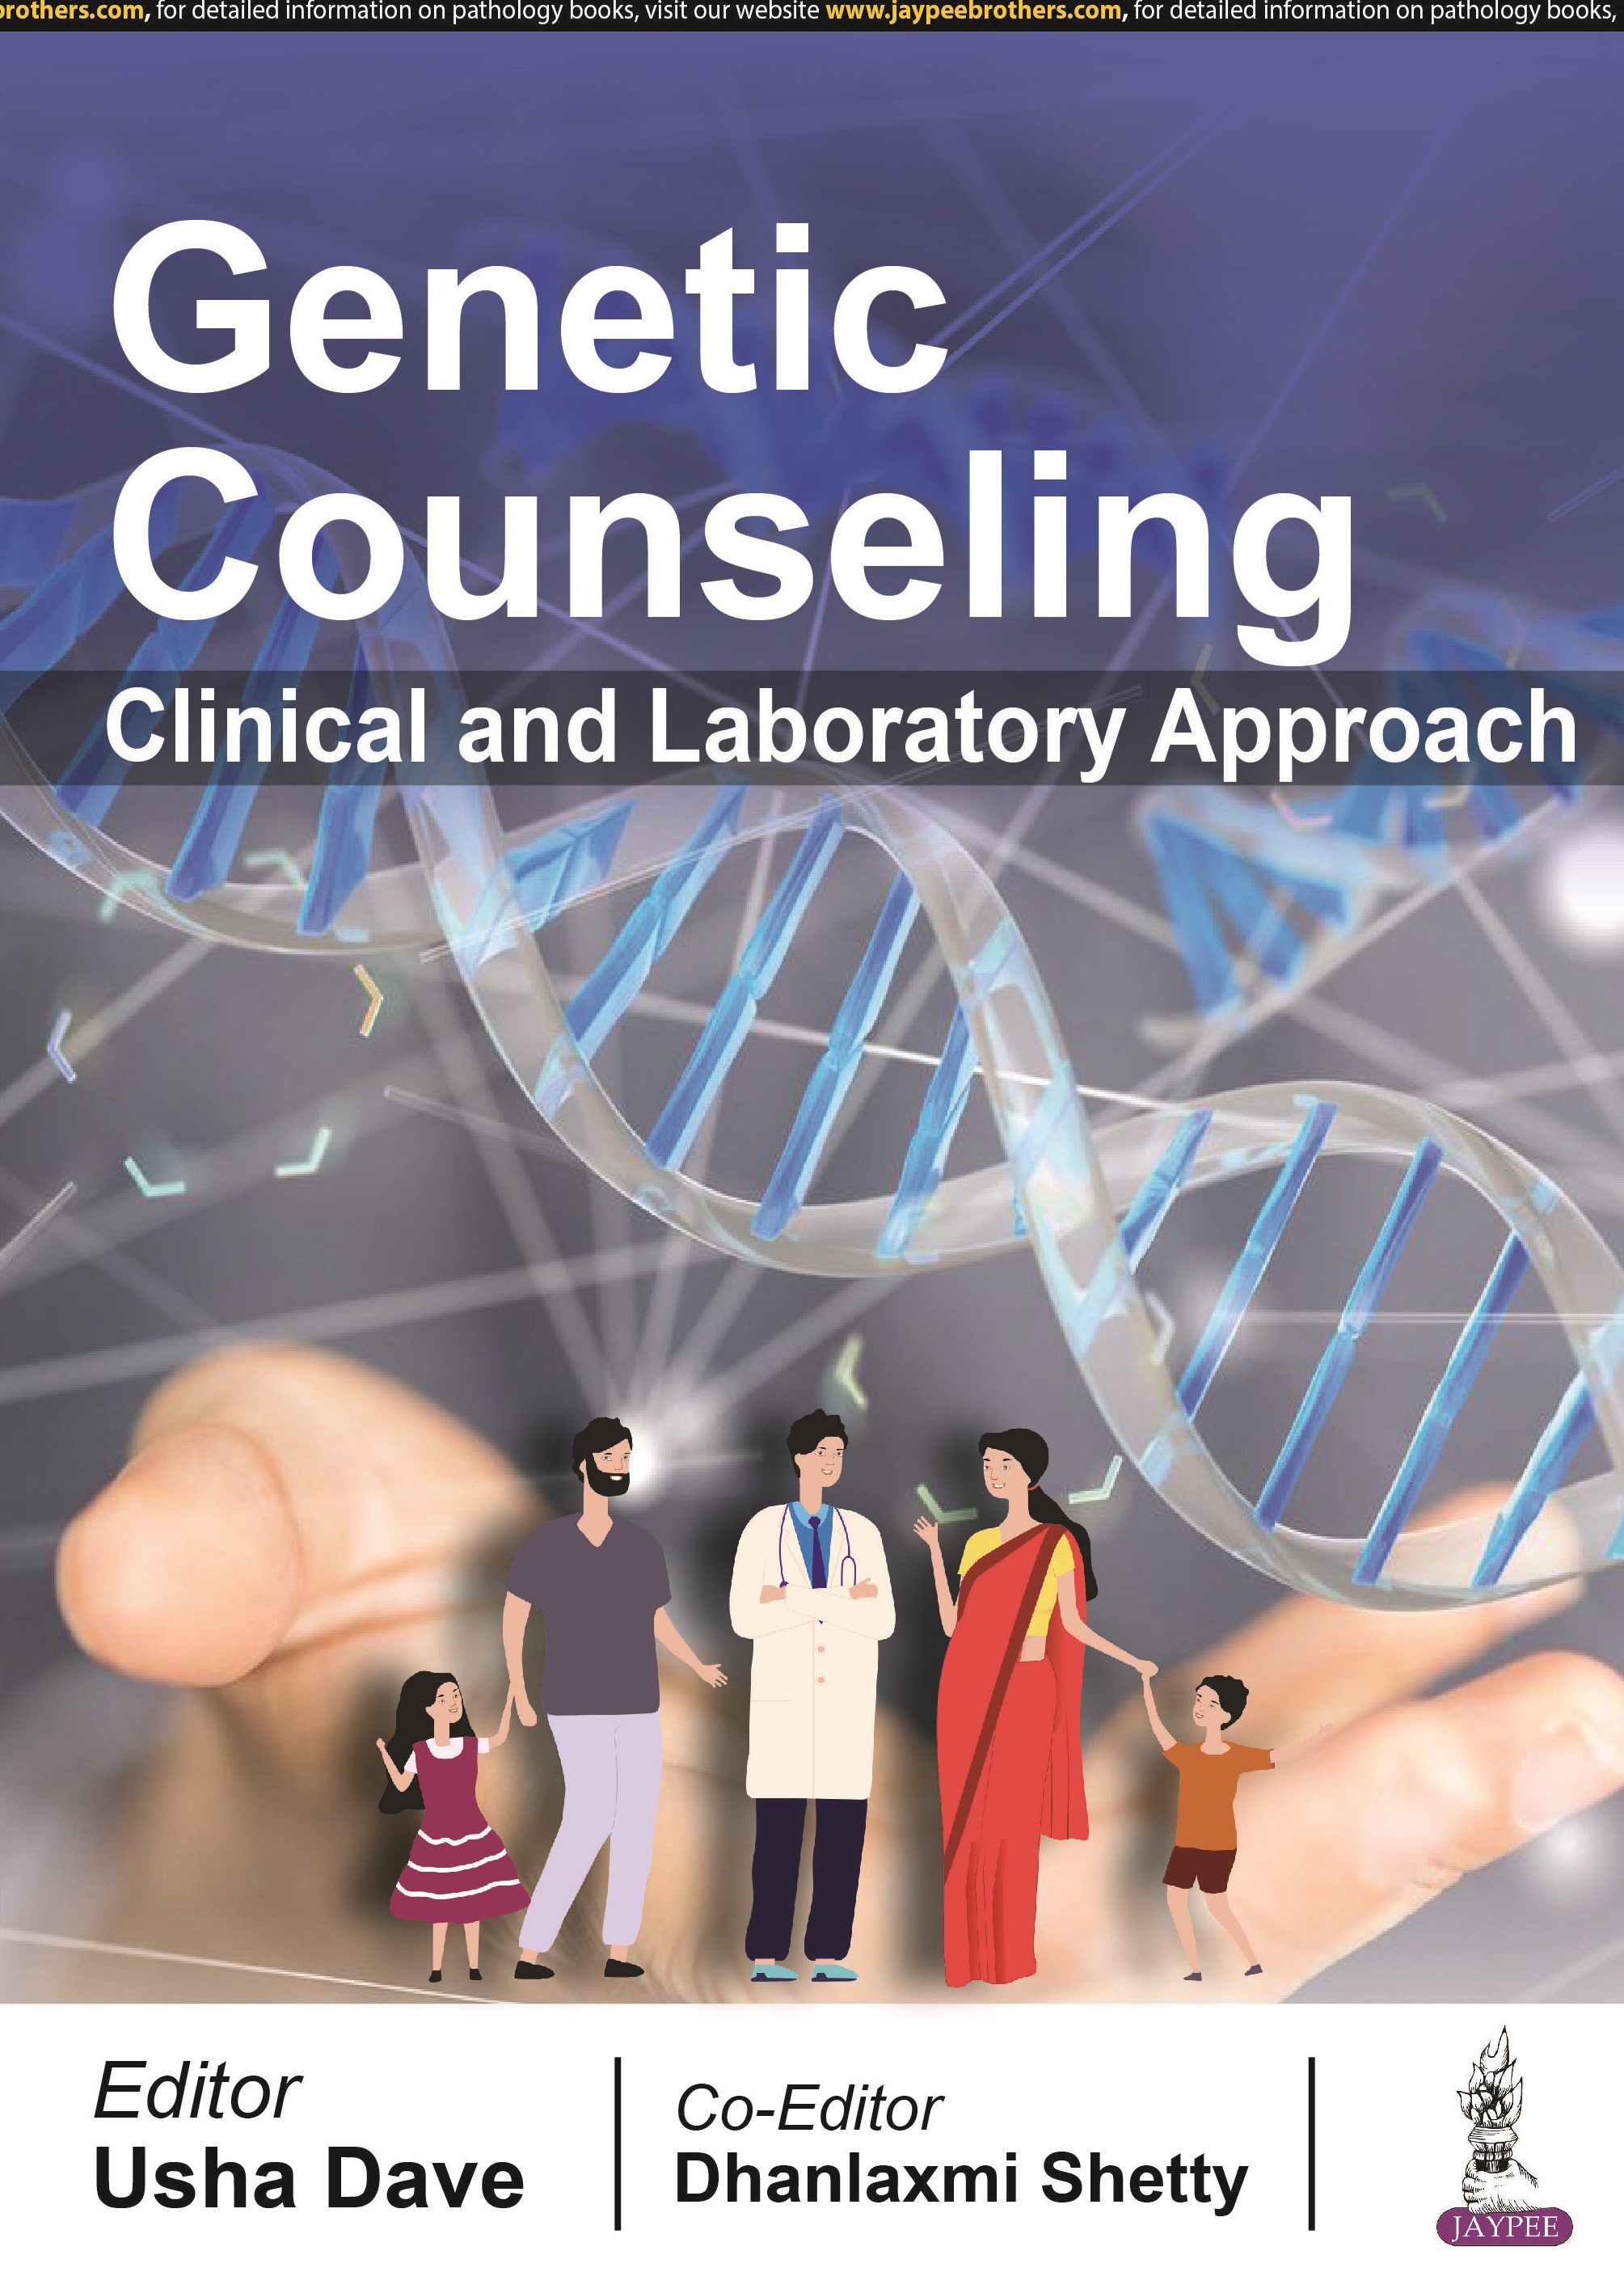 Genetic Counseling Clinical & Laboratory Approach